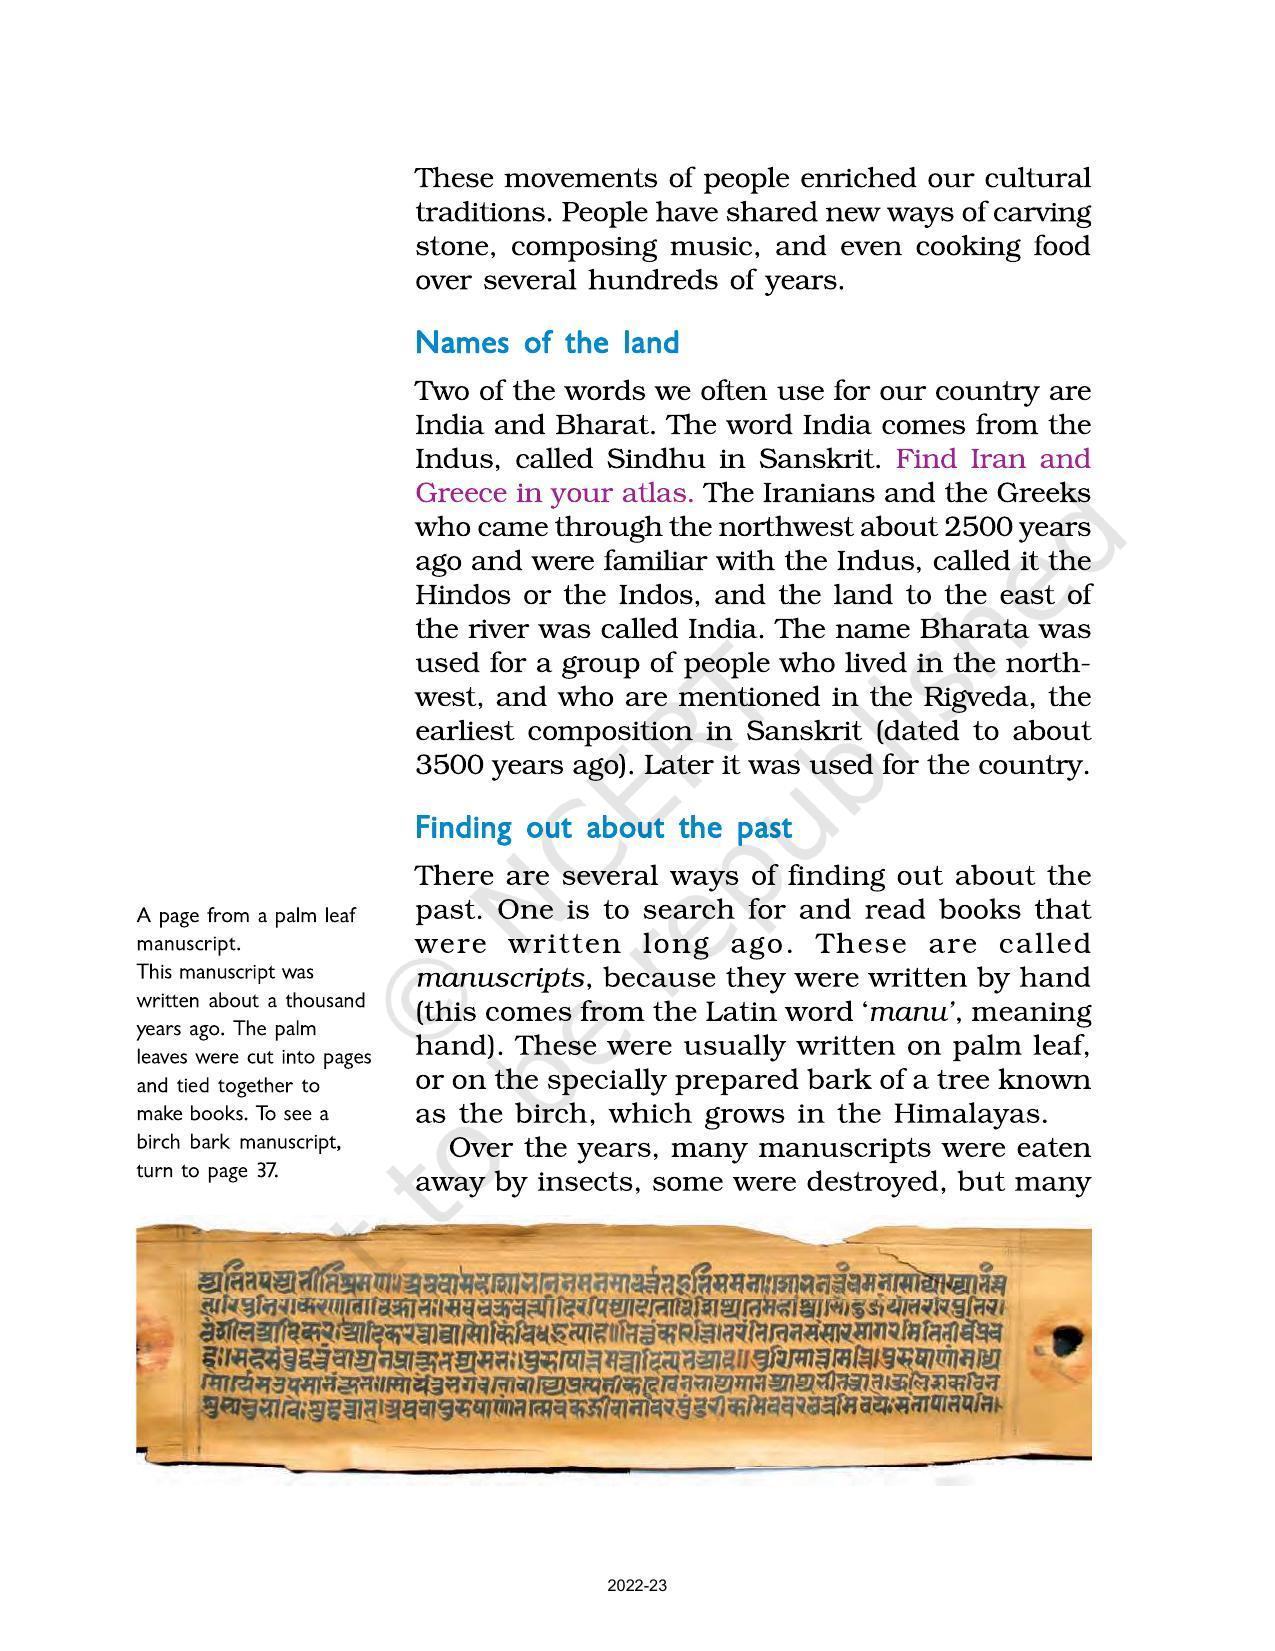 NCERT Book for Class 6 History (Social Science) : Chapter 1-What Where, How, and When? - Page 4